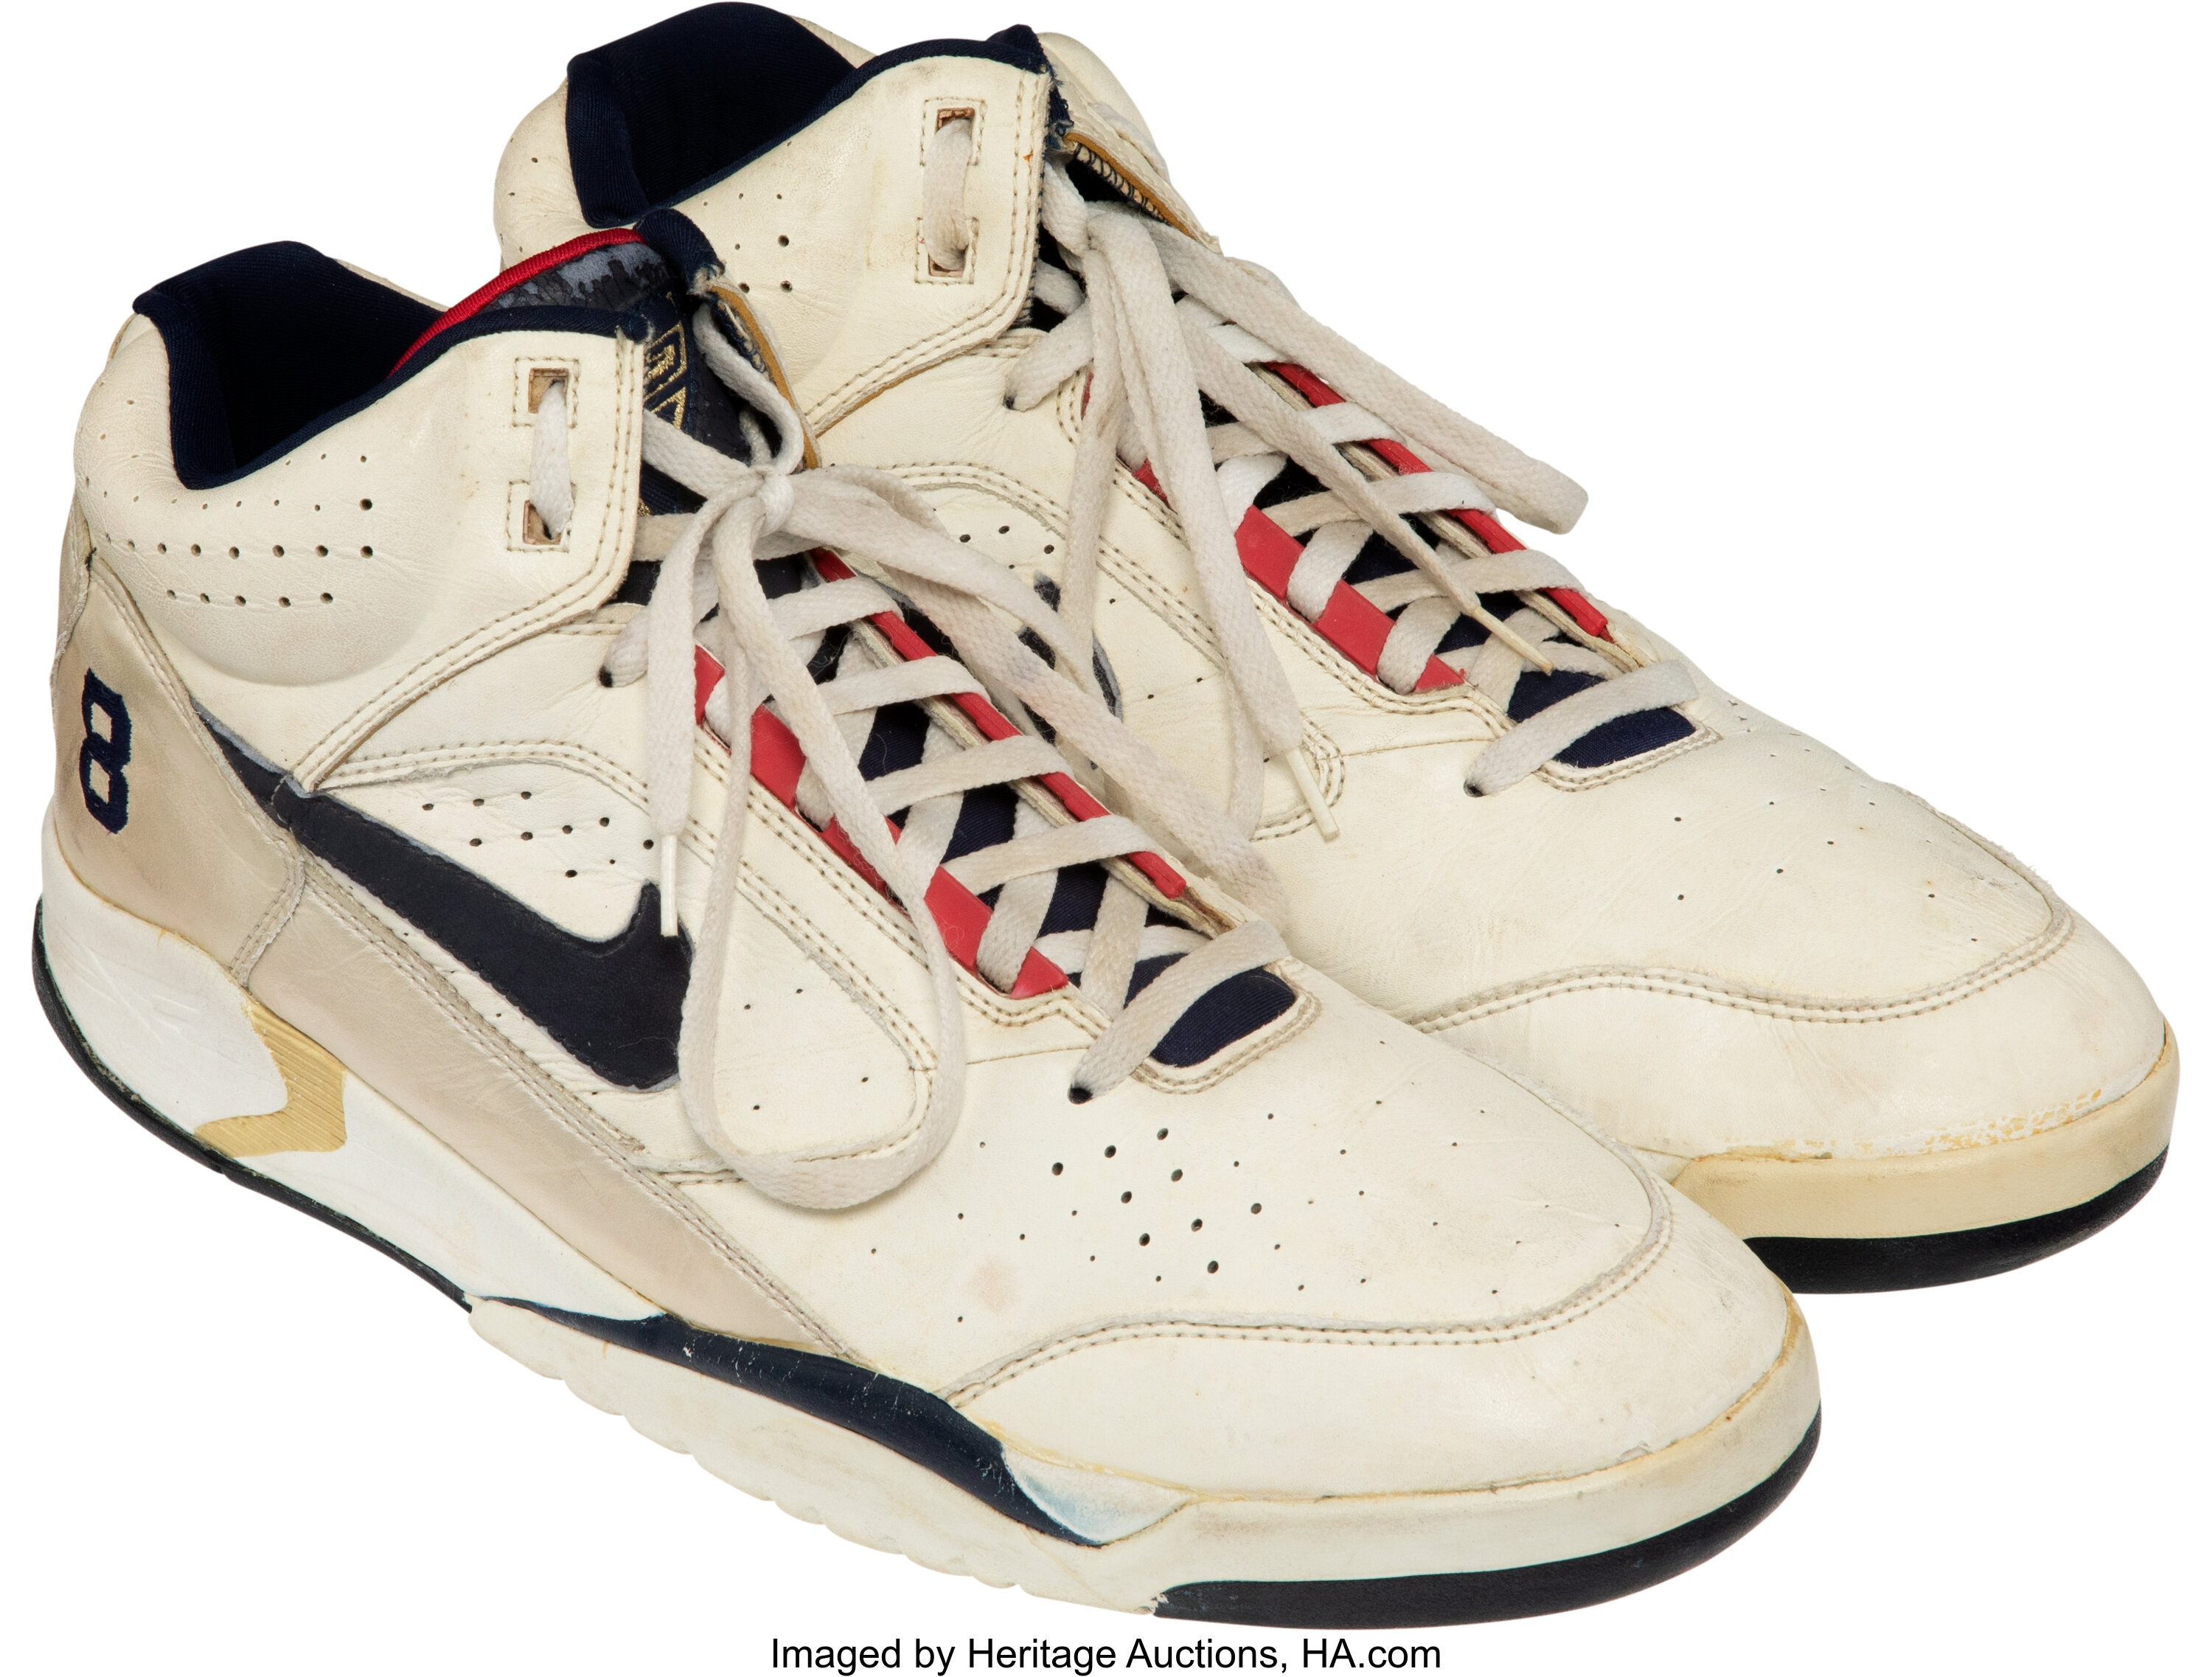 8 Best Sneakers Scottie Pippen Wore as an NBA Player